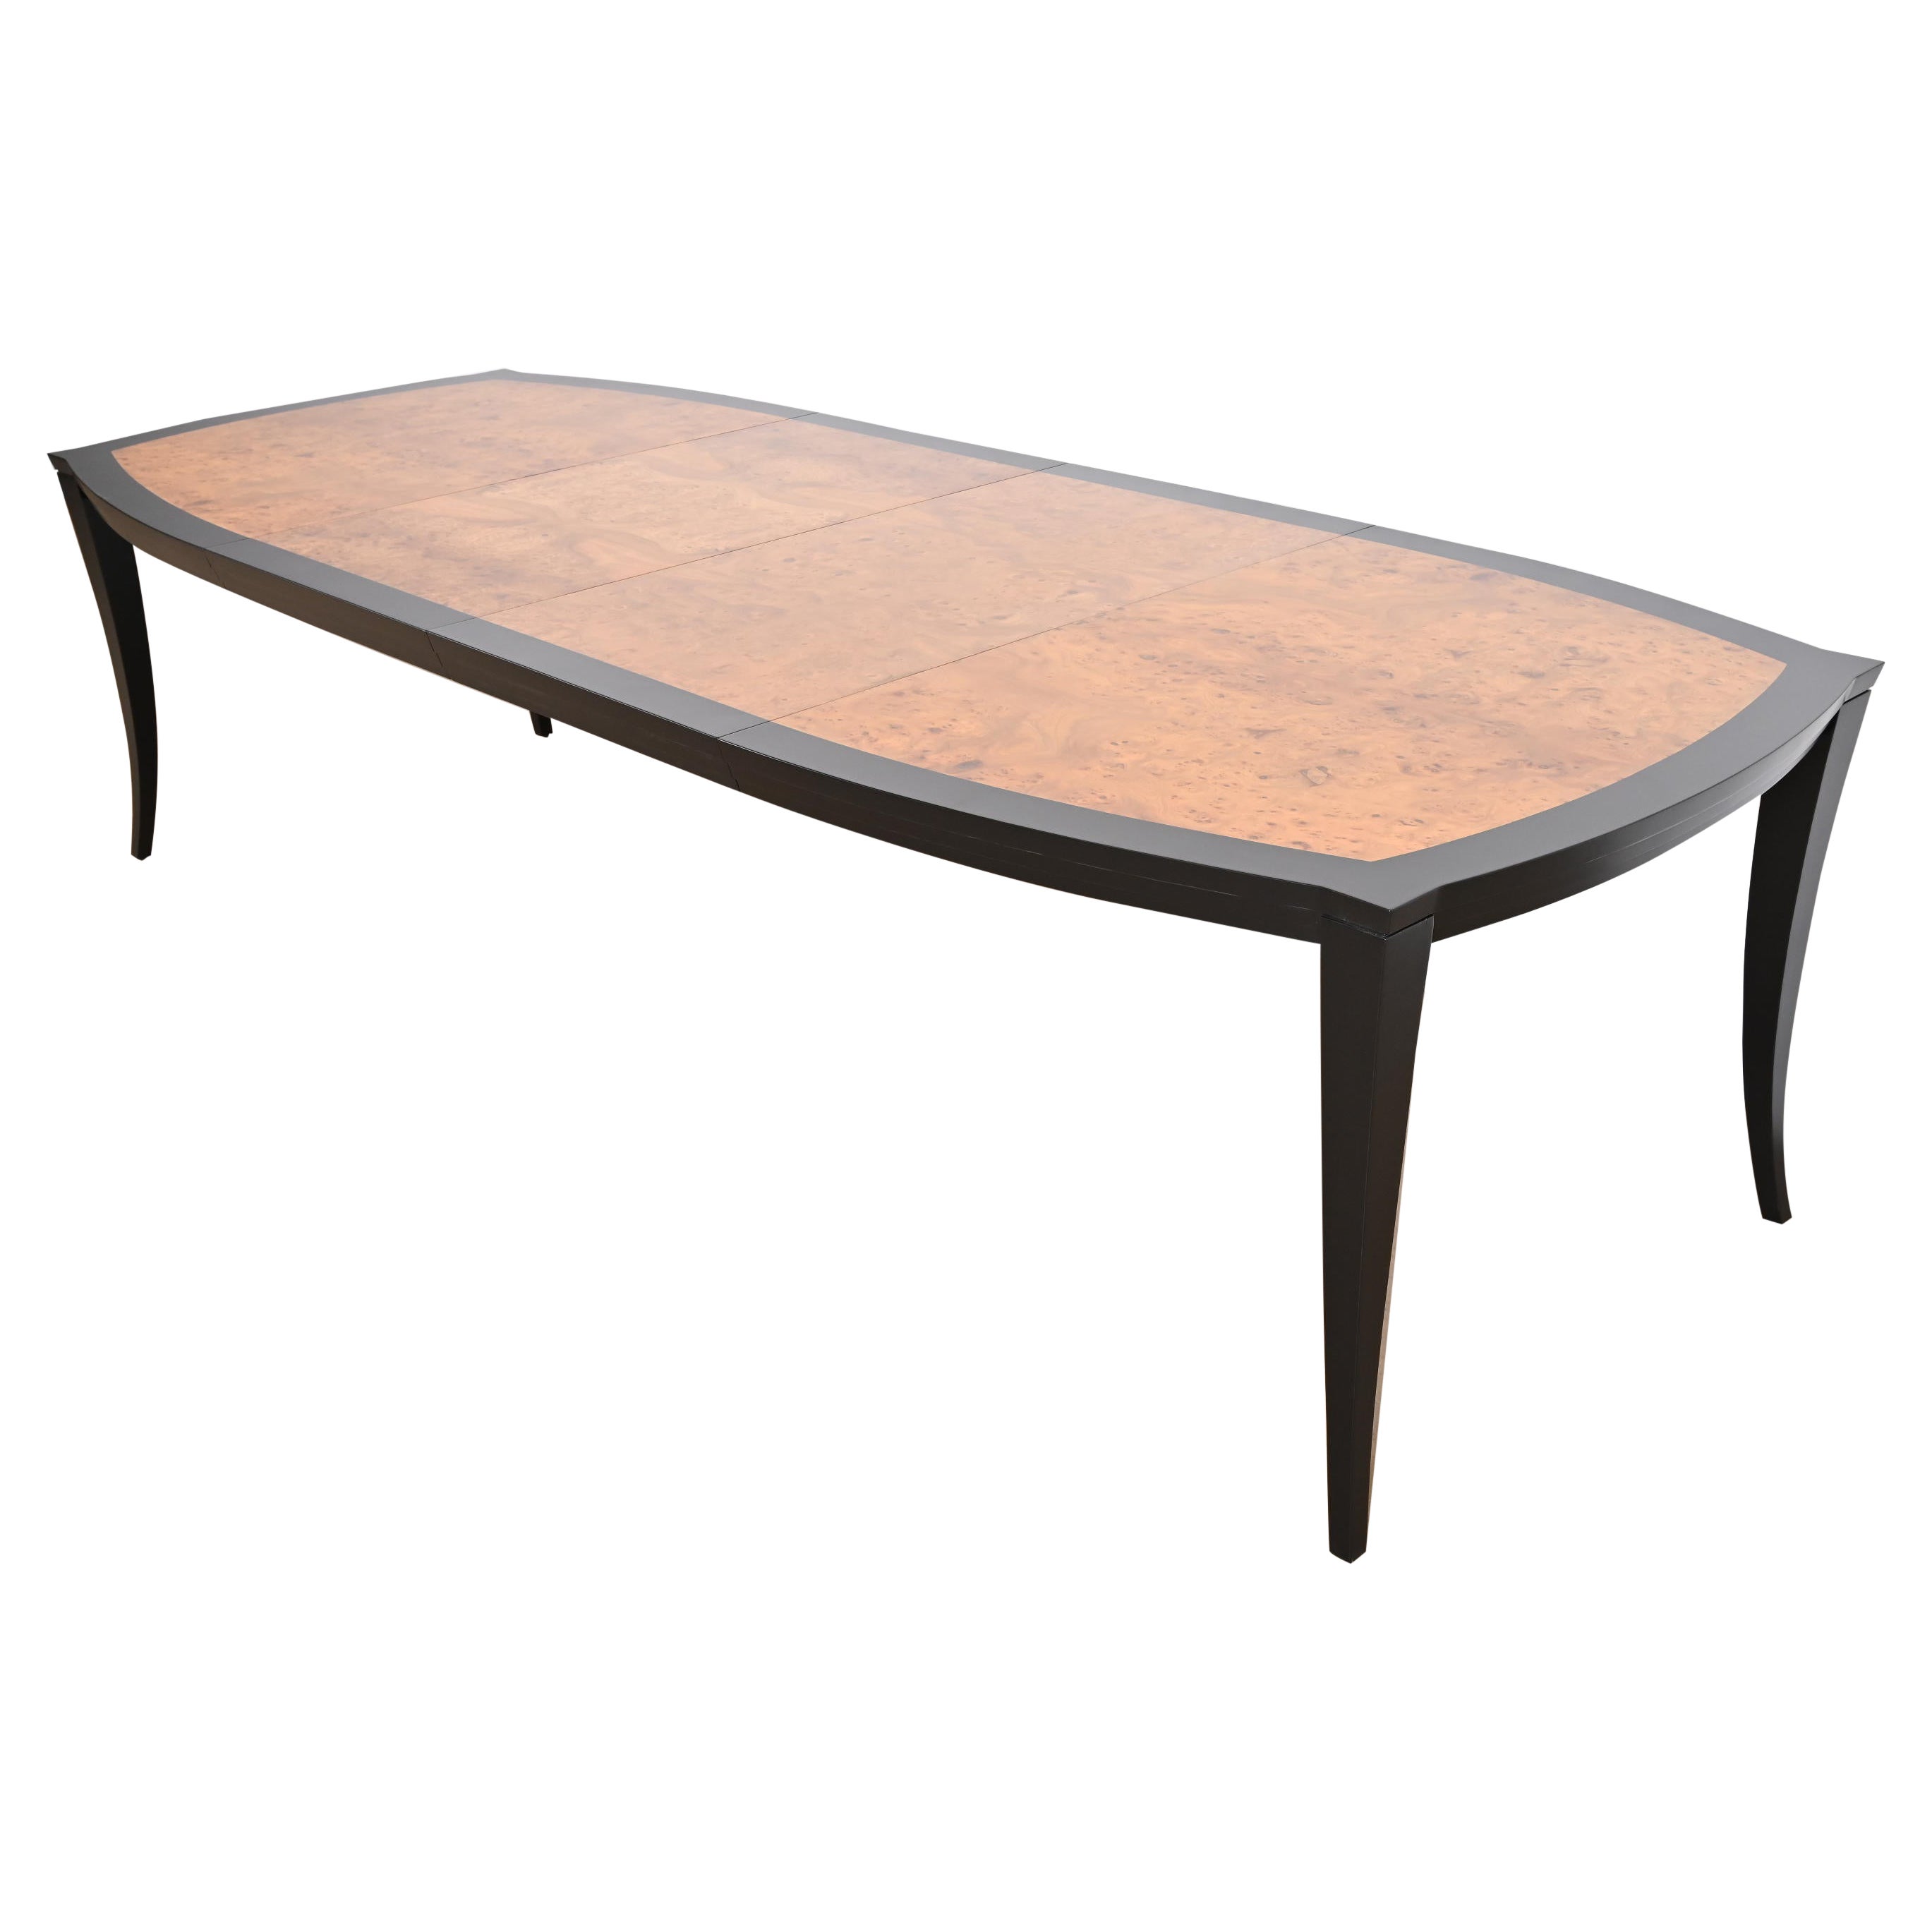 Vladimir Kagan Burl Wood and Black Lacquer Dining Table With Provenance